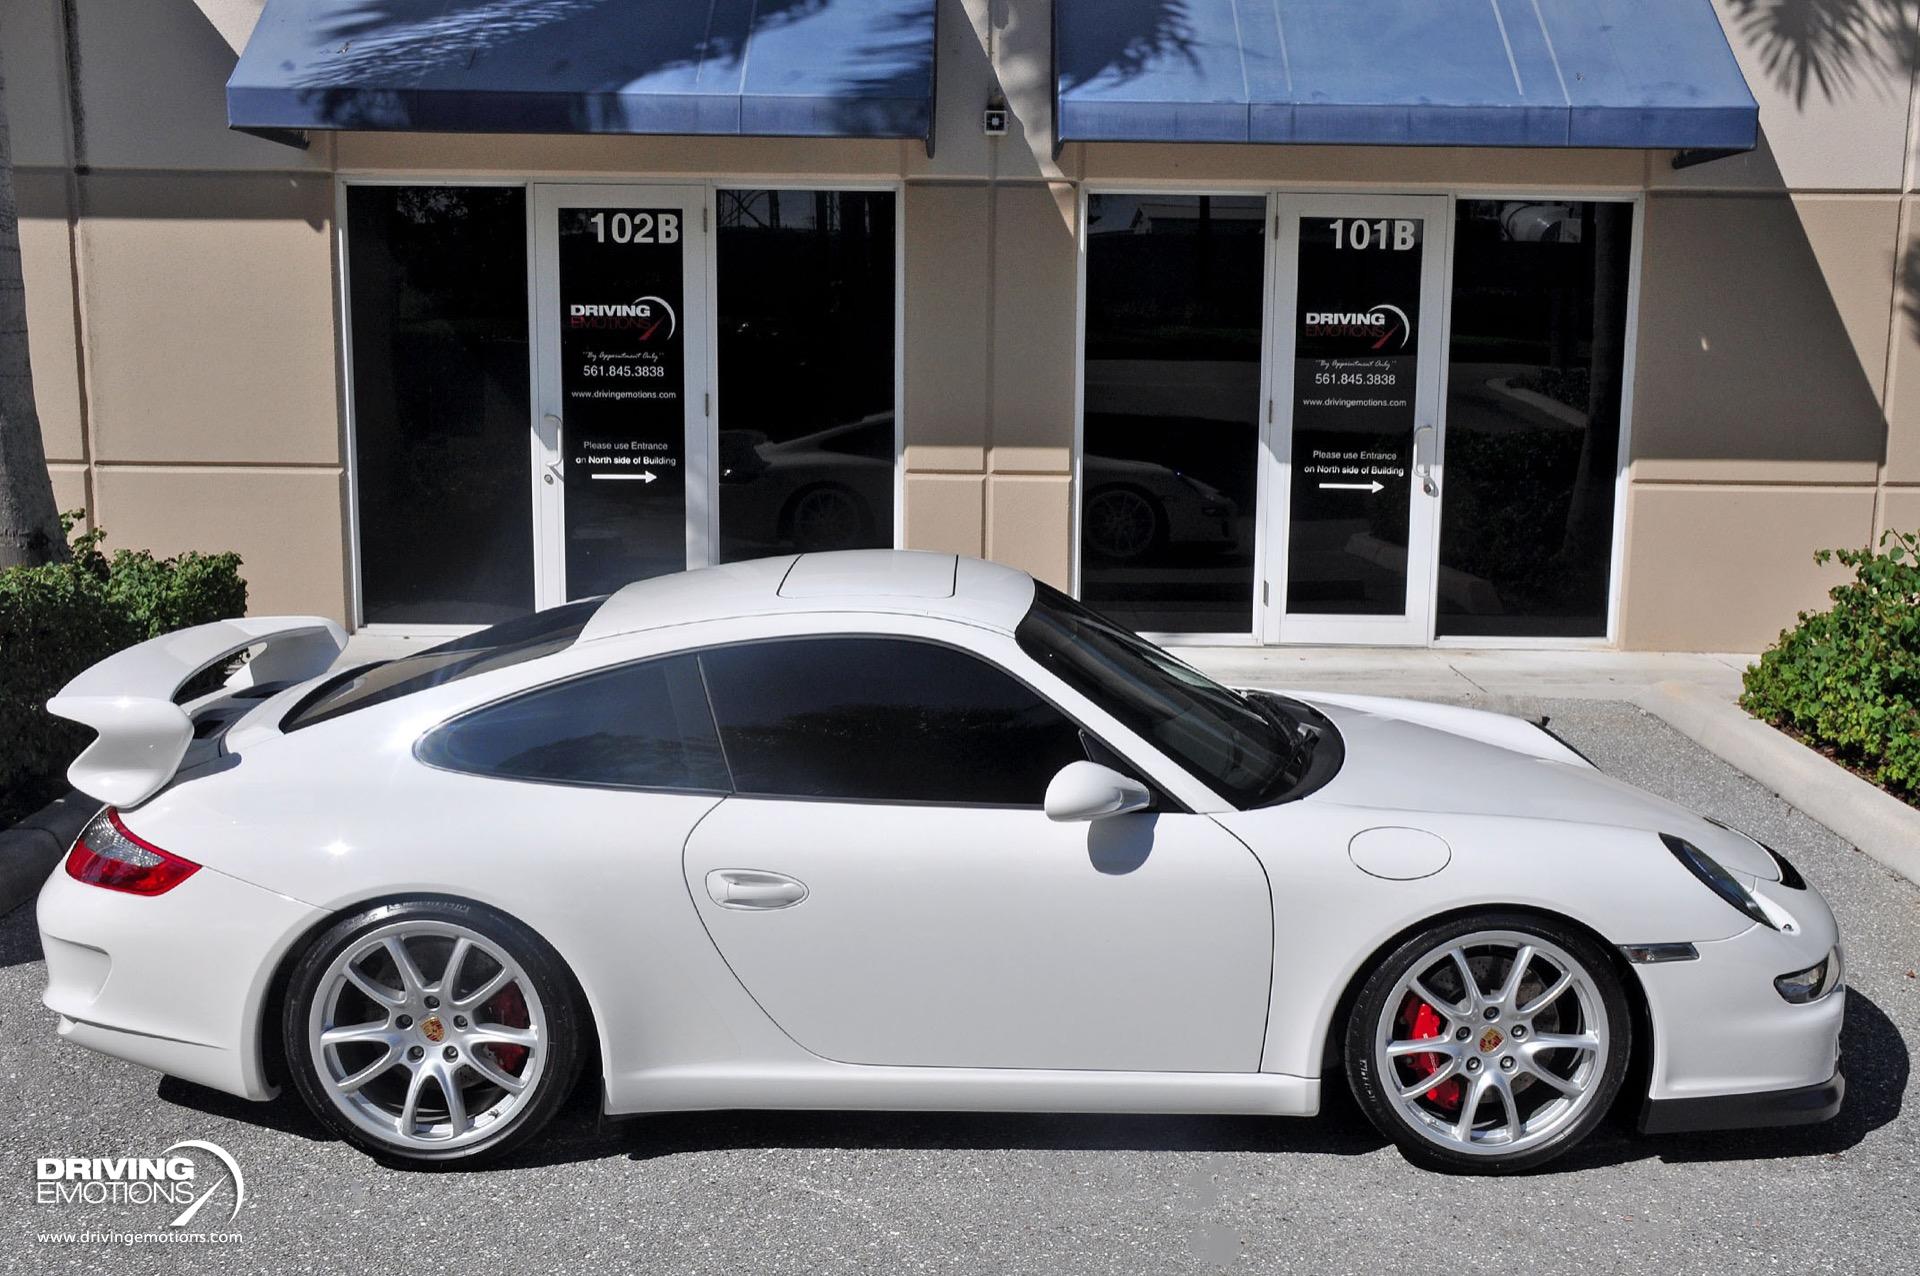 Used 2007 Porsche 911 GT3 997 GT3! 6-SPEED MANUAL! COLLECTOR! | Lake Park, FL